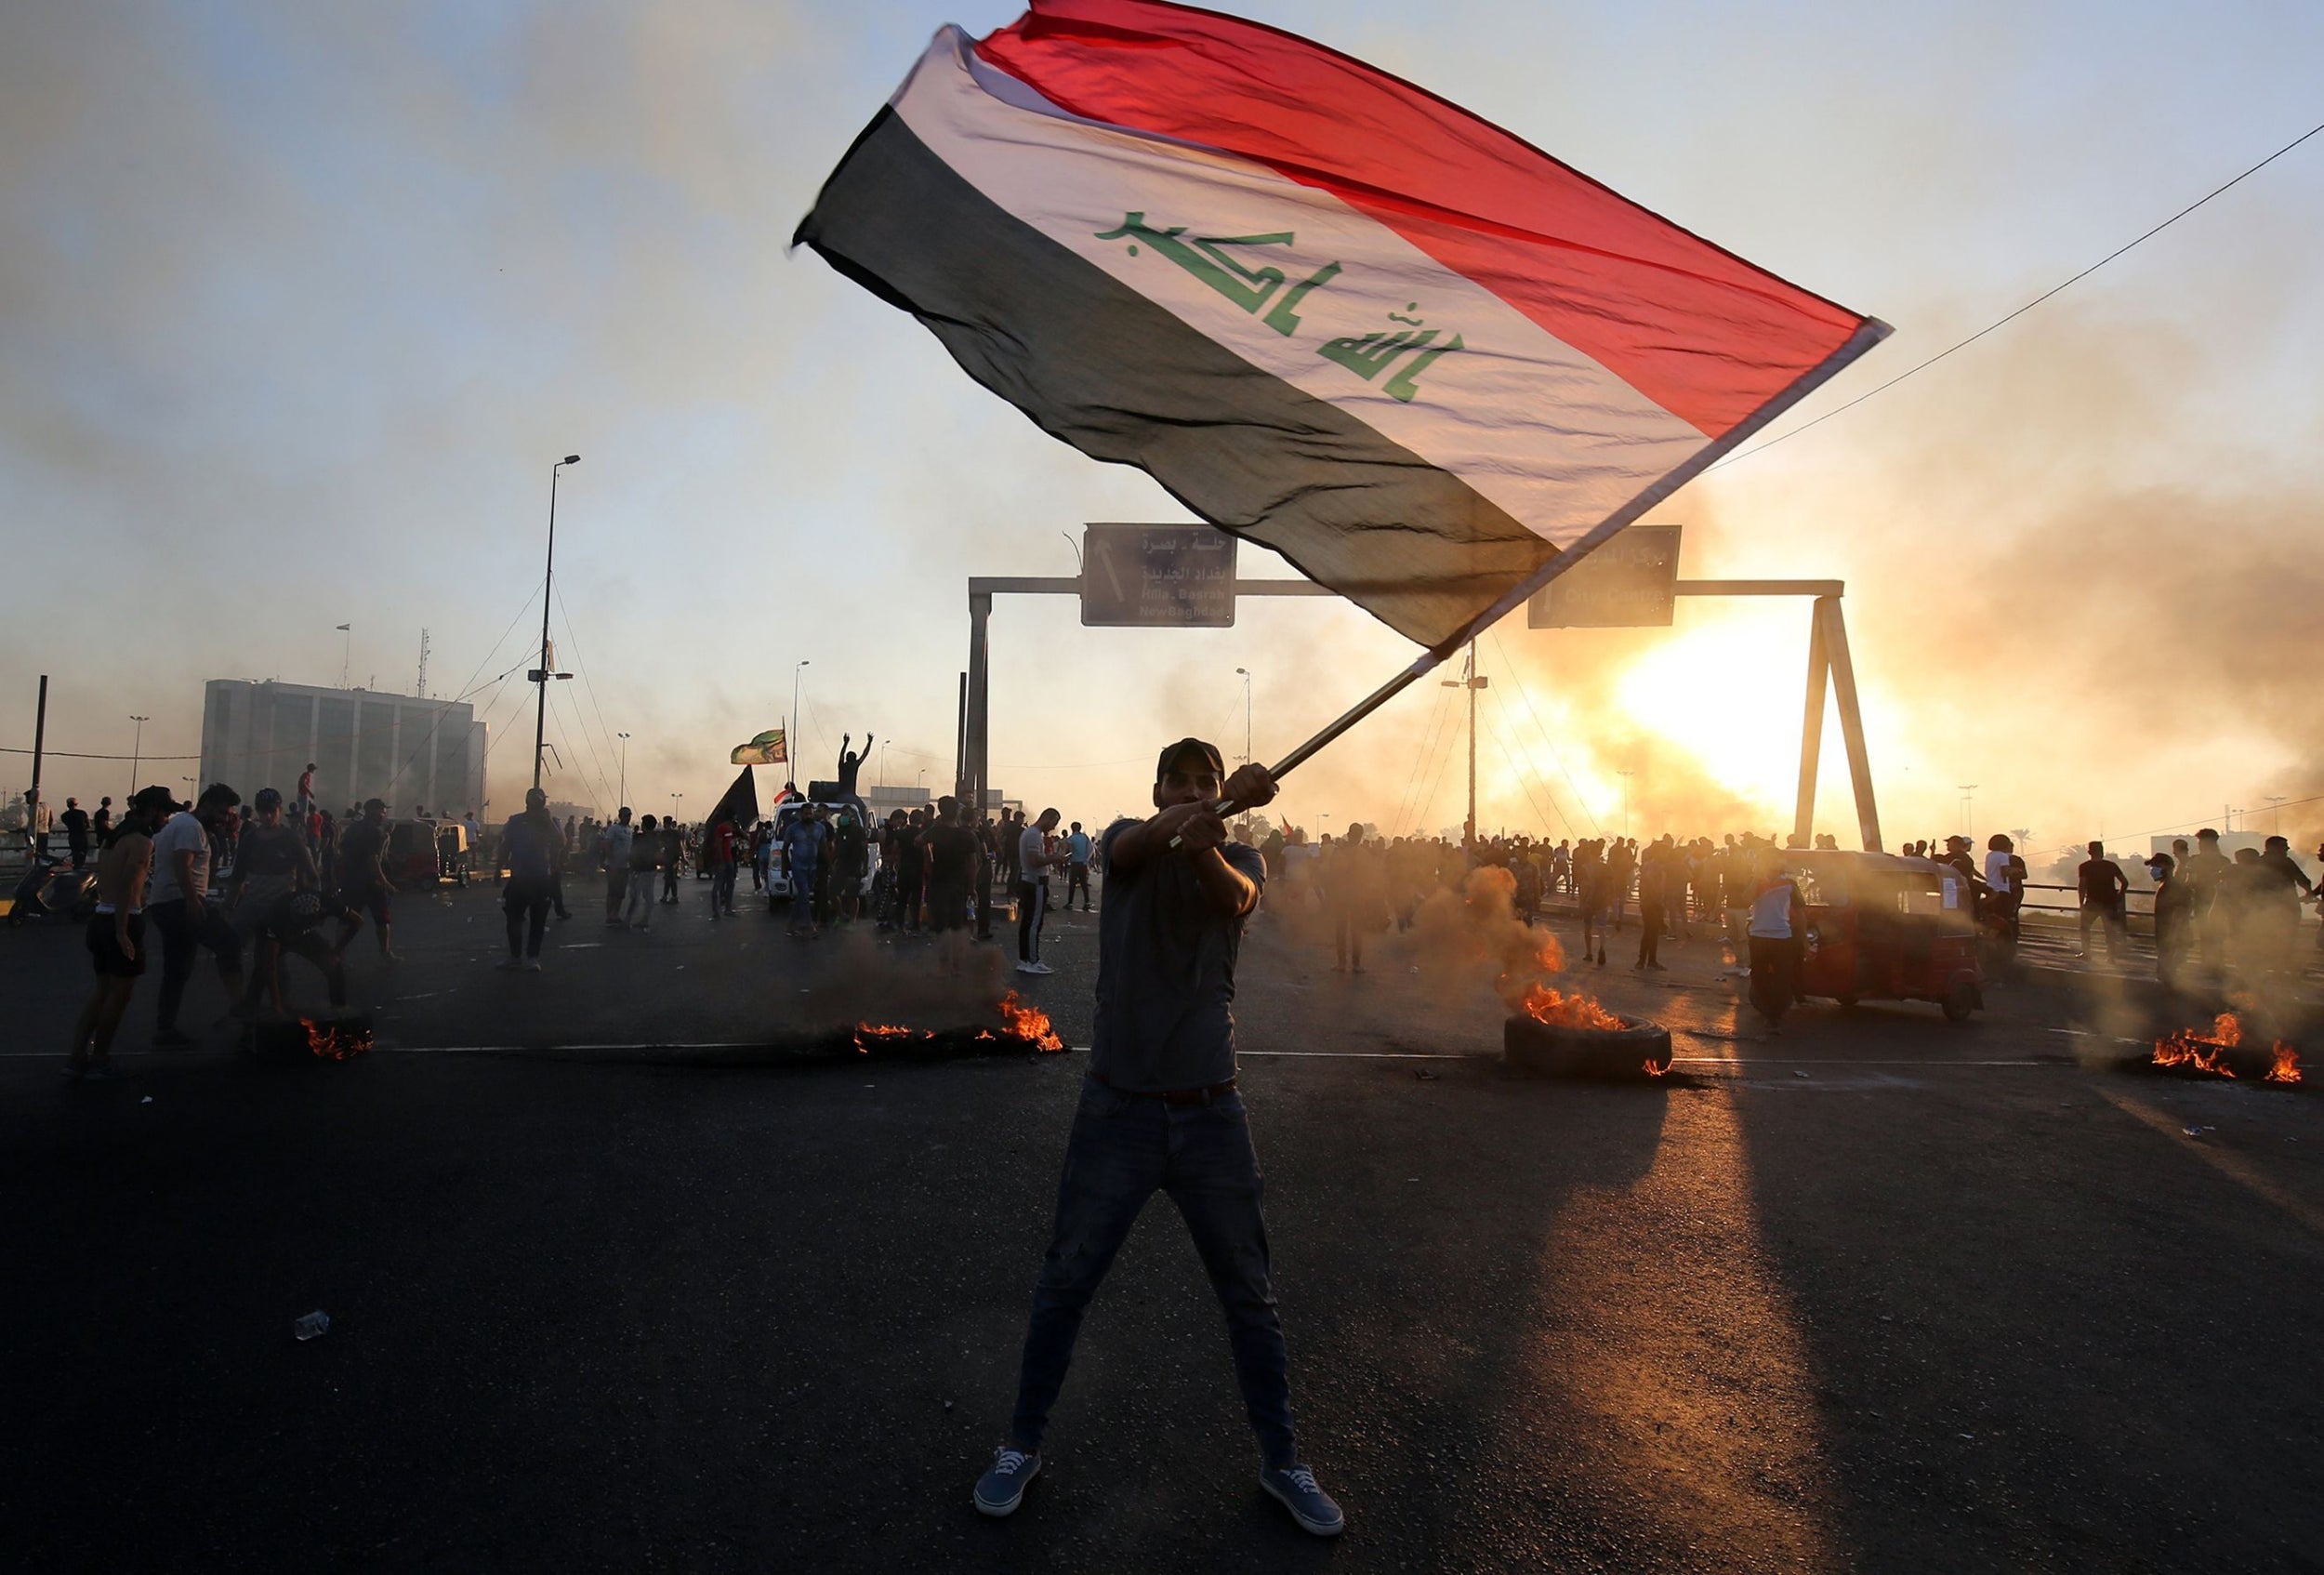 An Iraqi protester waves the national flag during a demonstration against state corruption, failing public services and unemployment